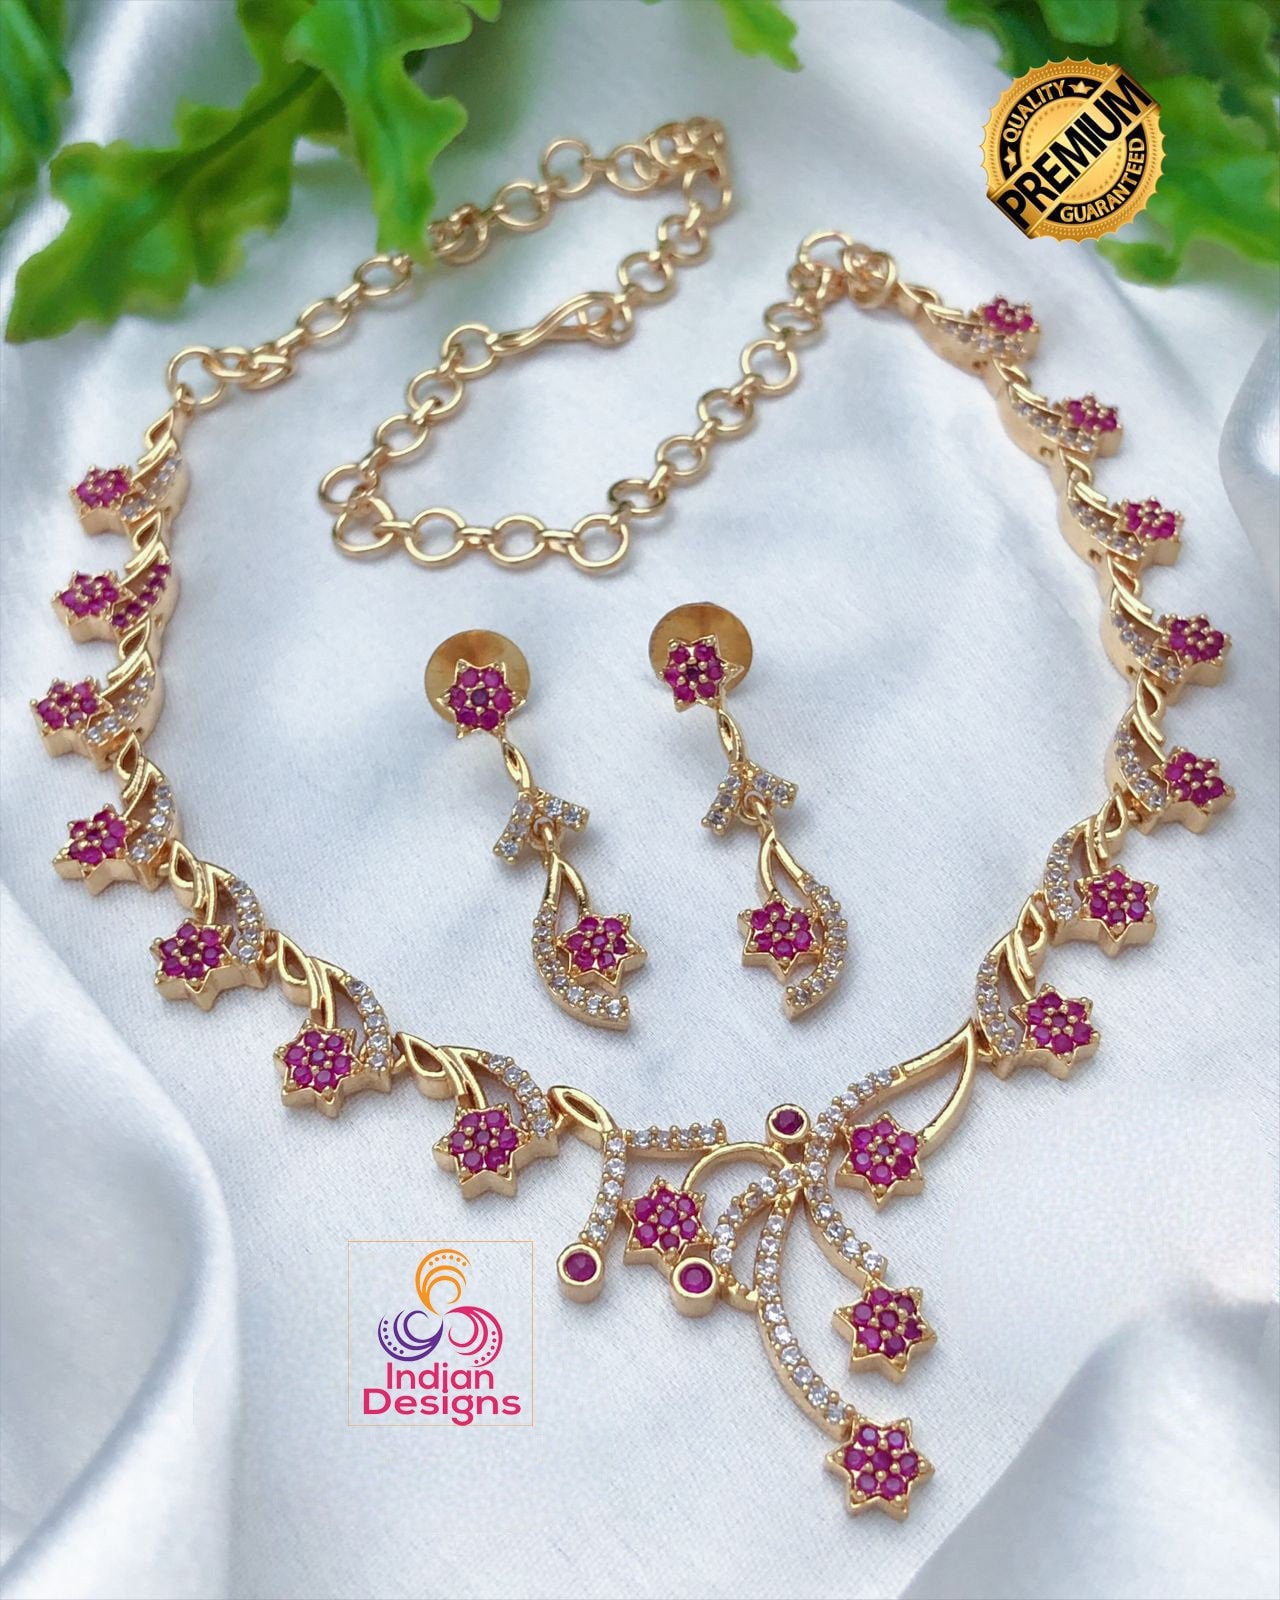 22k Gold Plated American Diamond Necklace with Green and Pink stones|Indian jewelry sets|Ruby & Emerald necklace Floral designs|Gift for her